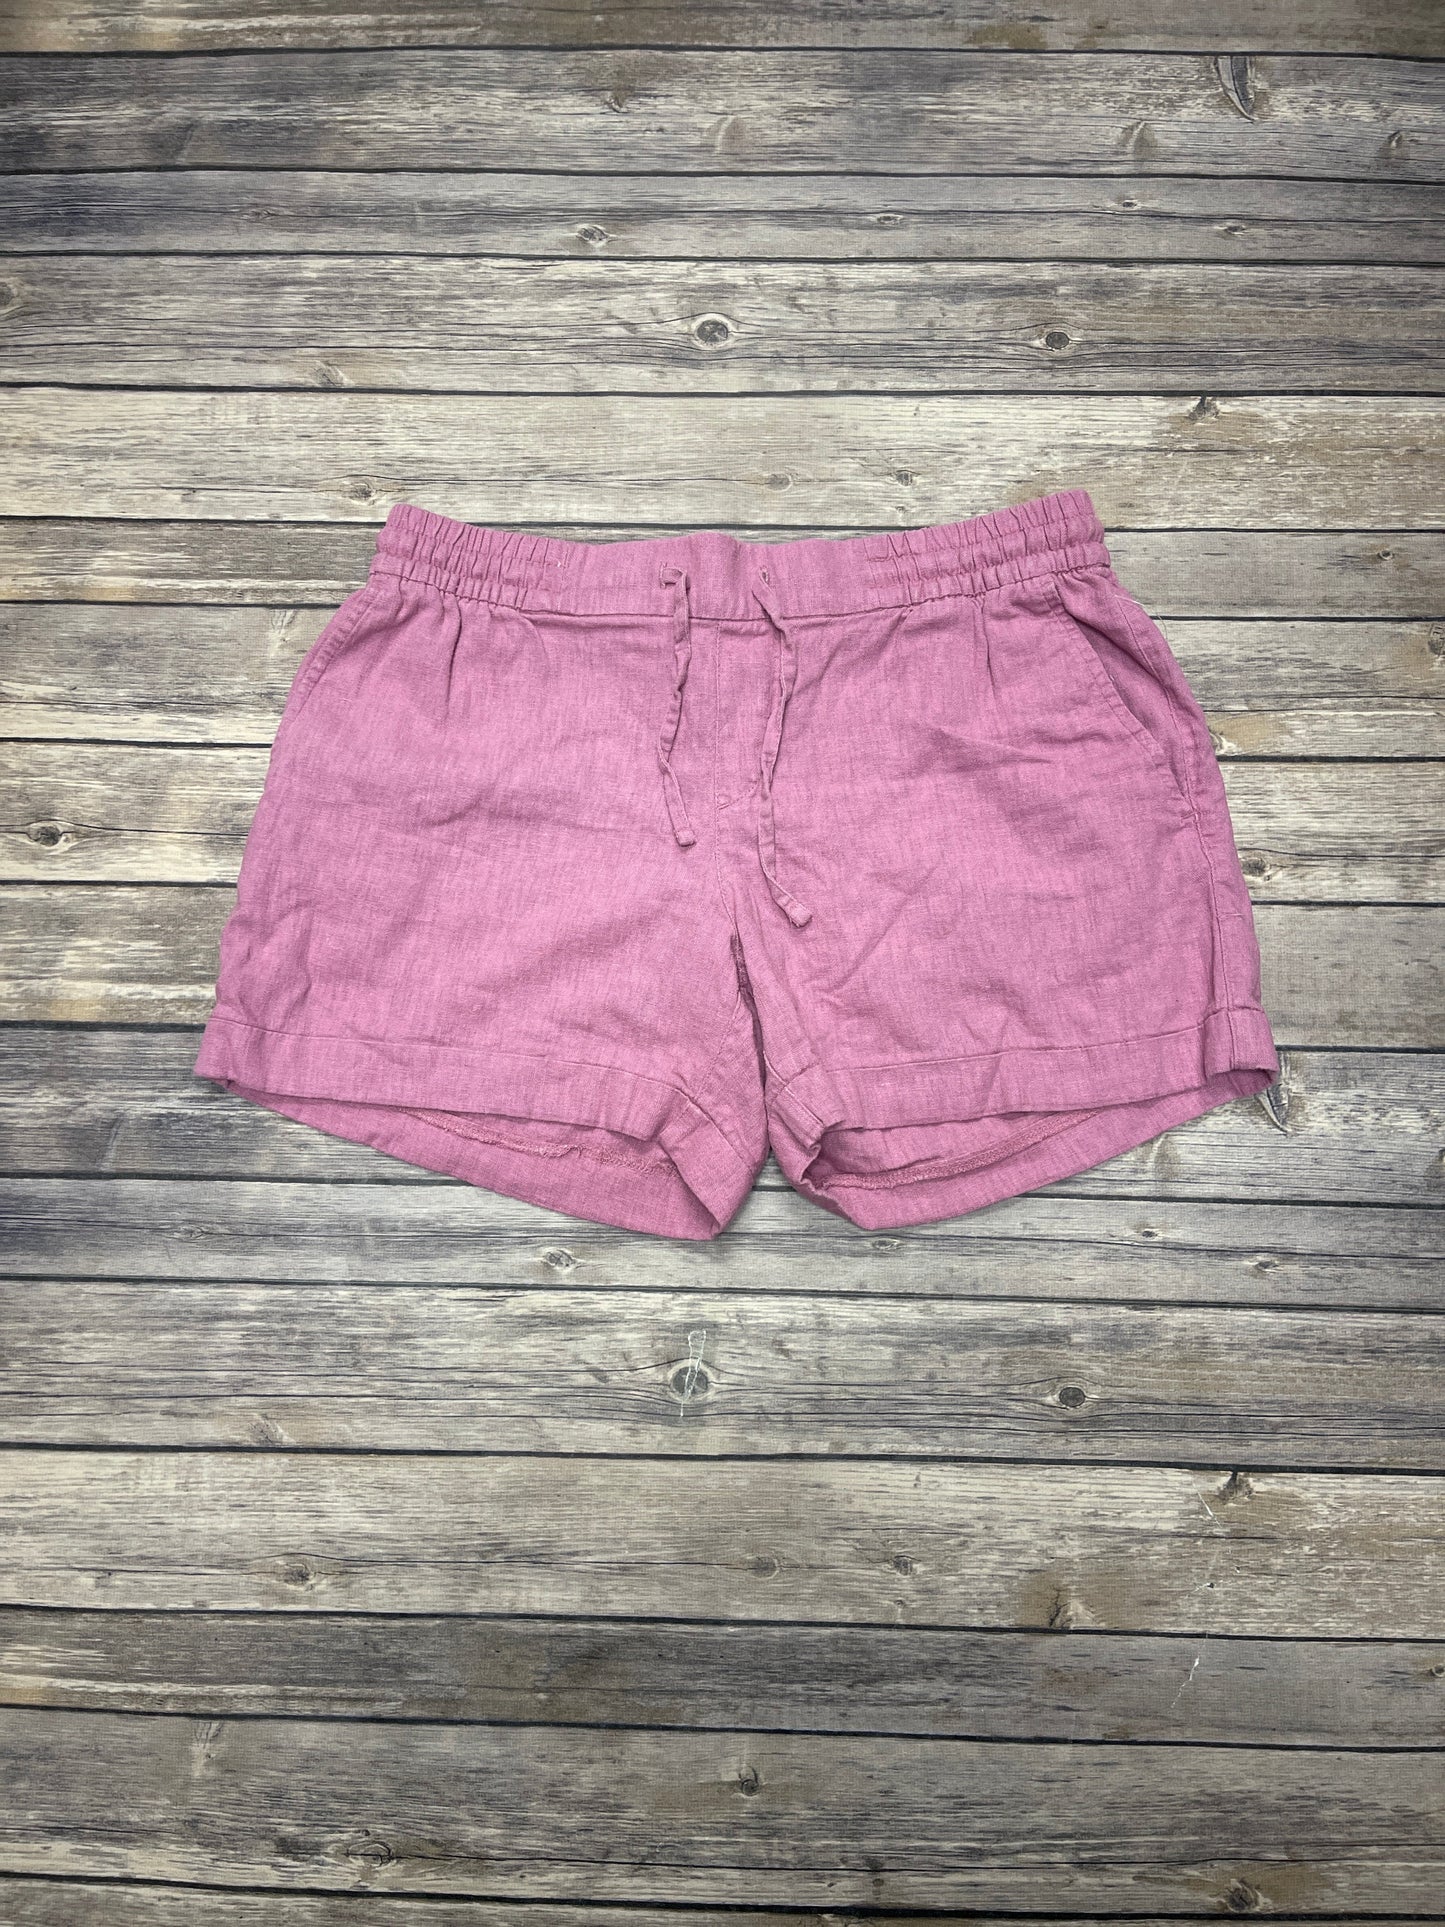 Shorts By Old Navy  Size: M